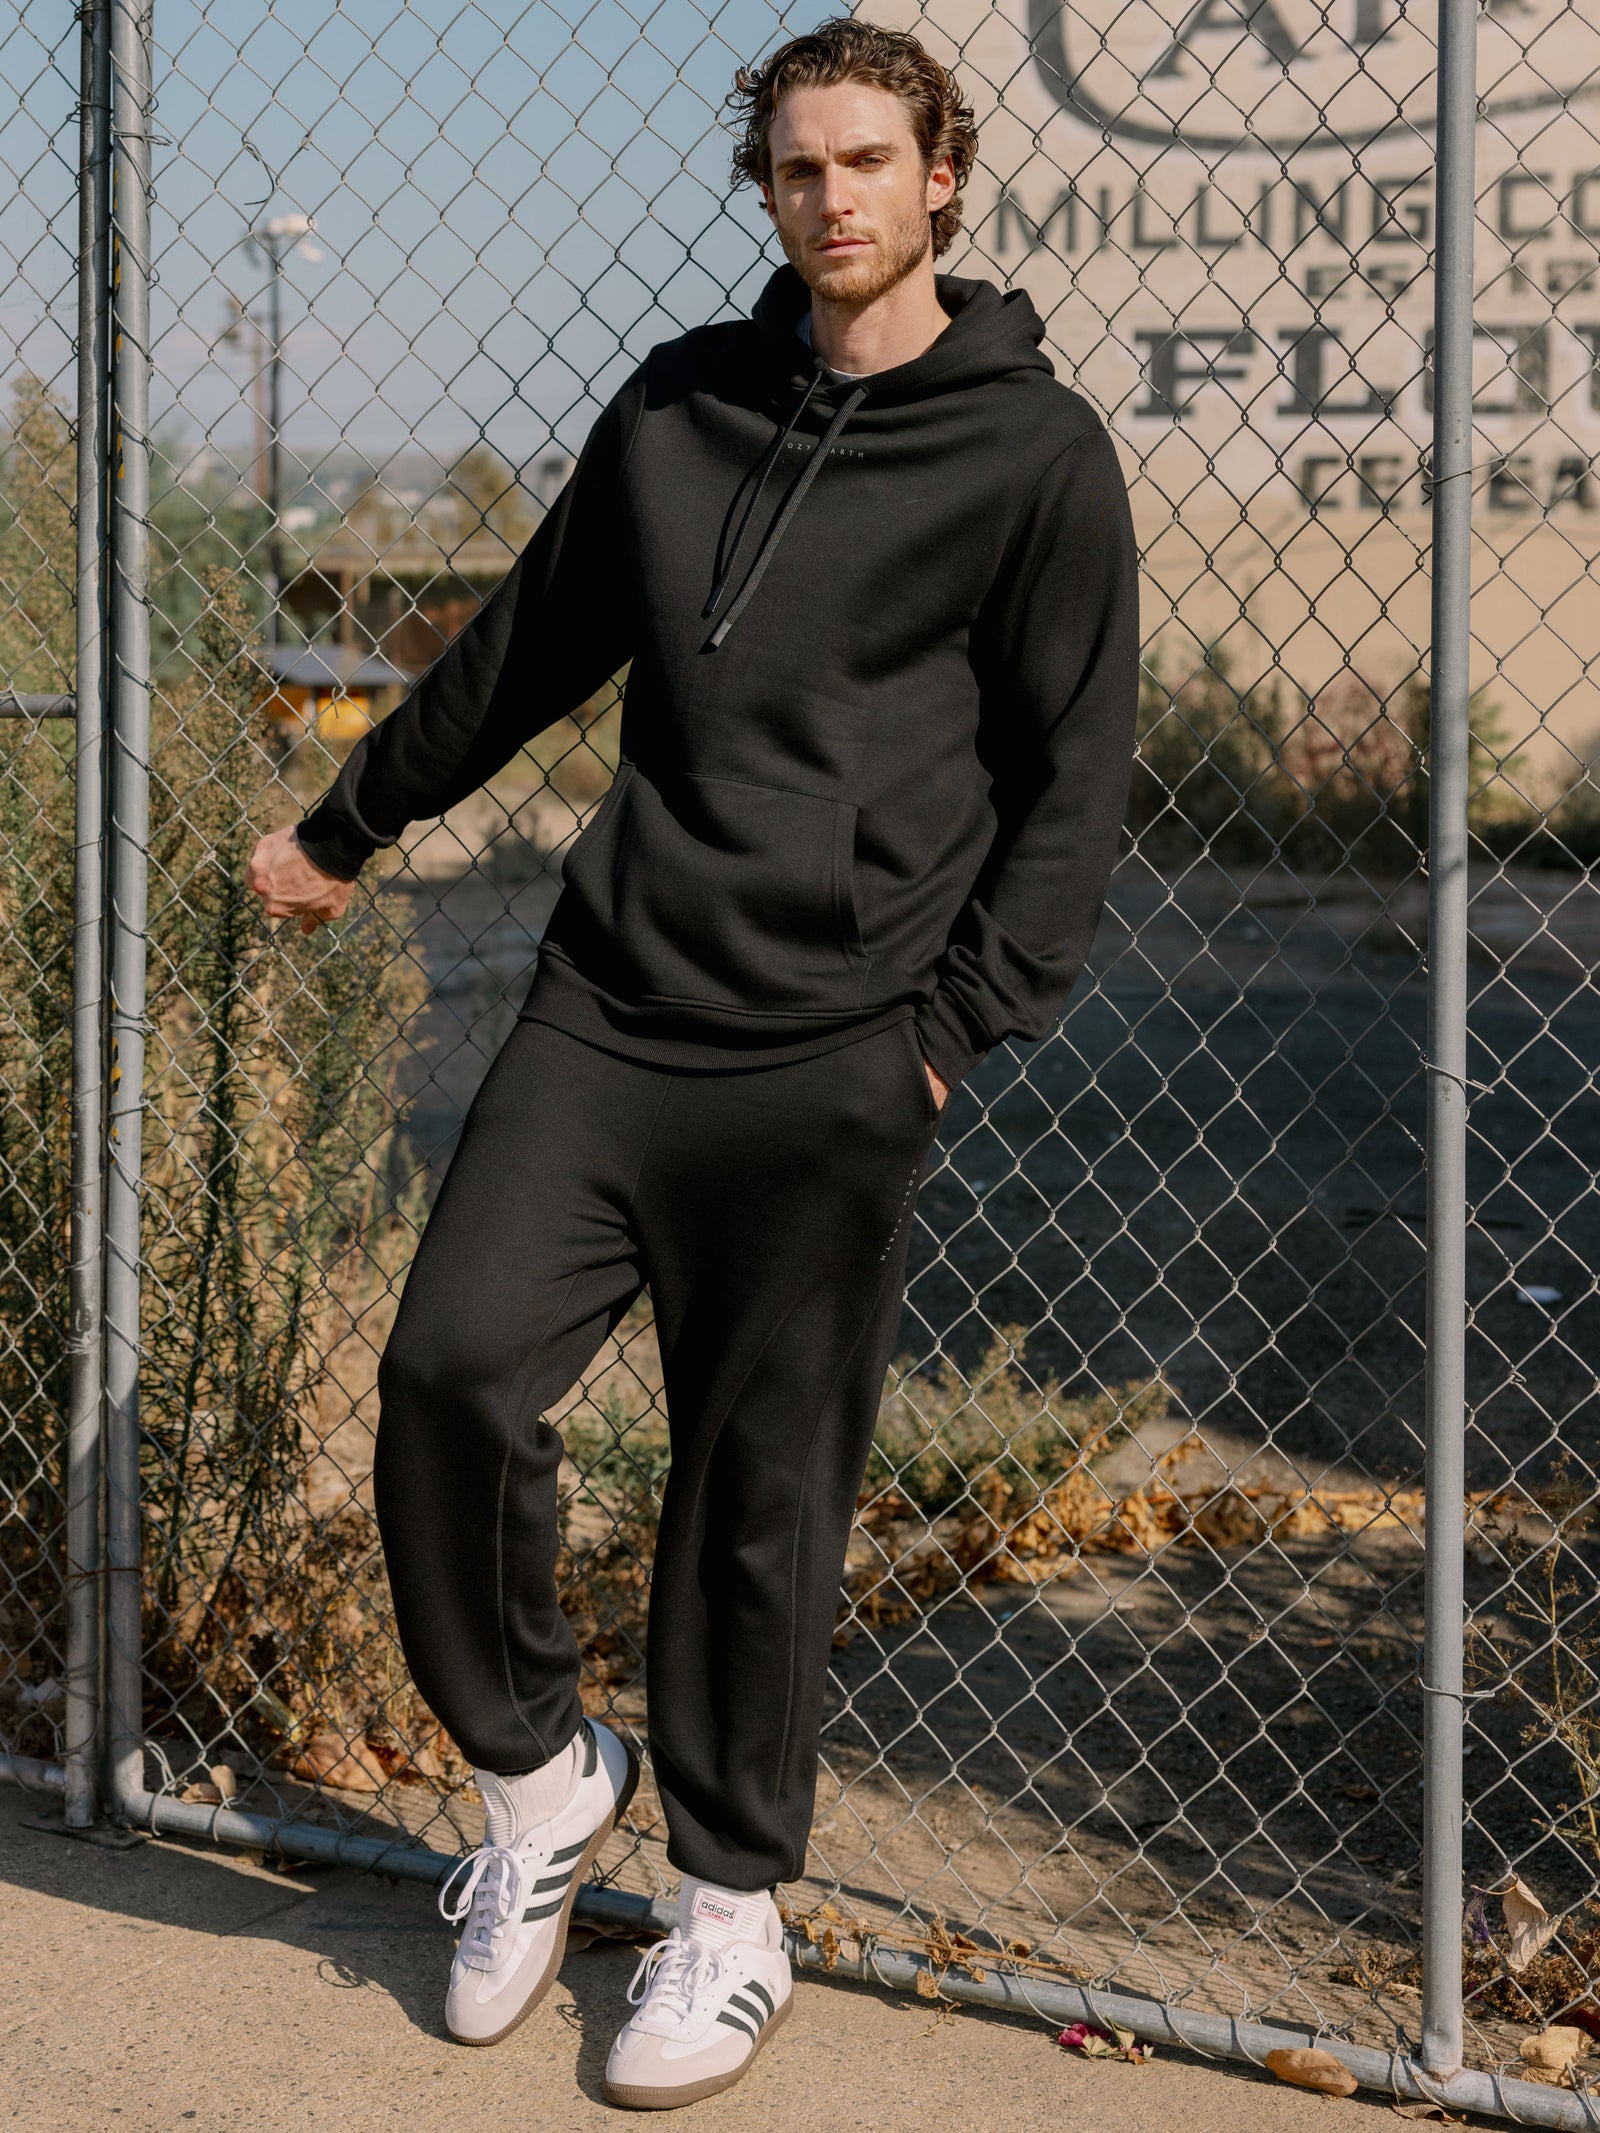 Man next to fence wearing black cityscape sweats and hoodie 